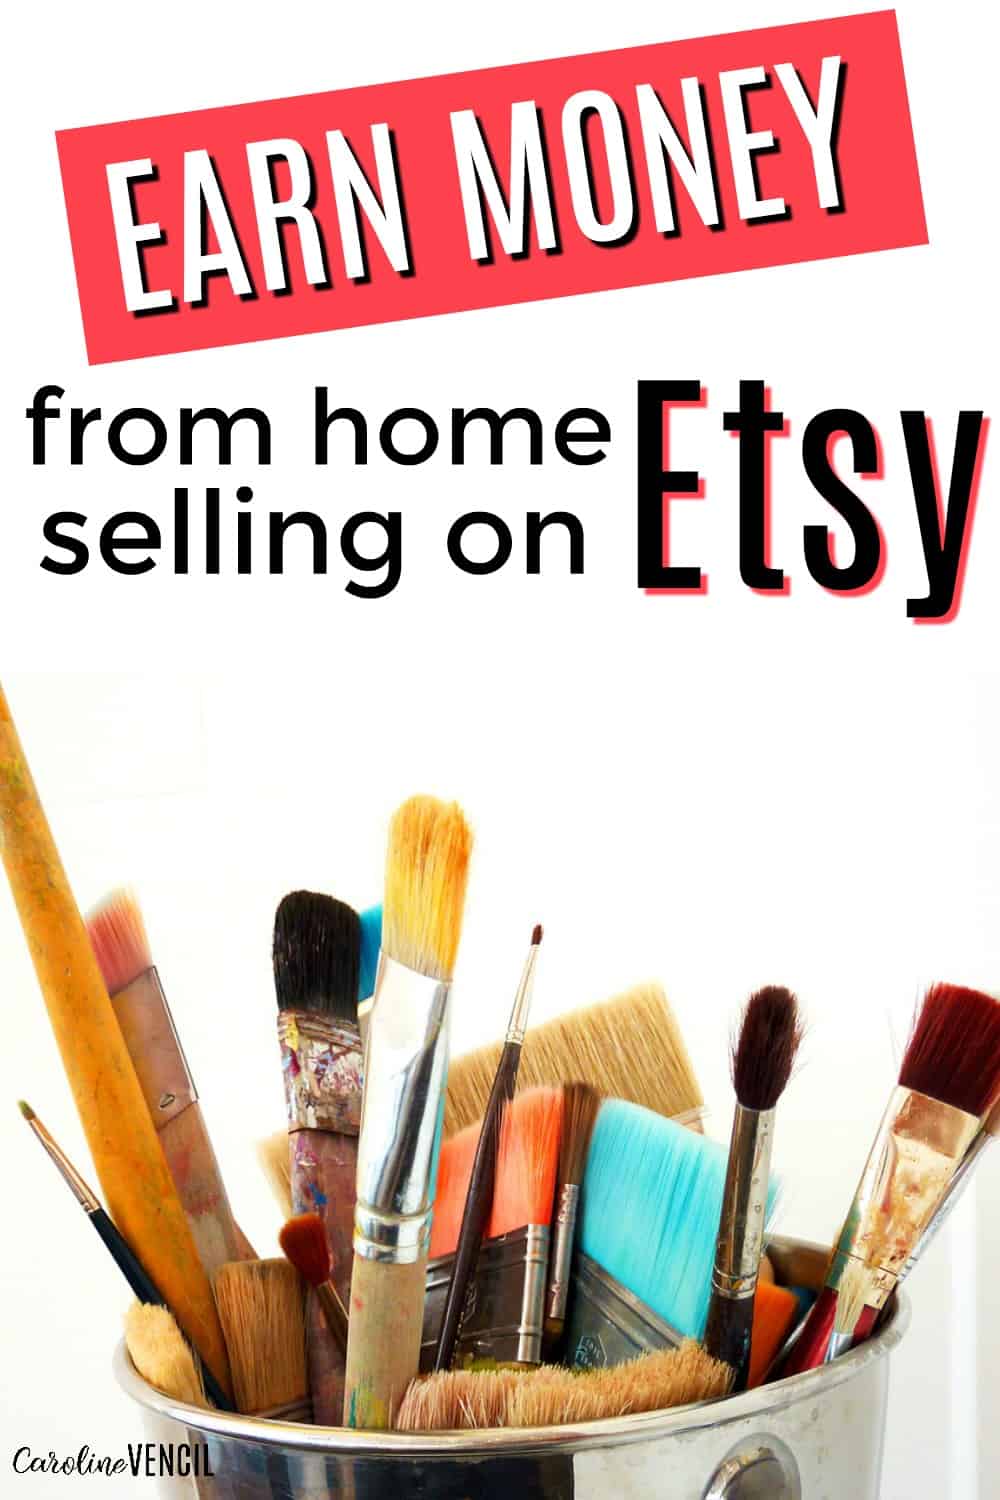 This is so cool! I never knew you could earn a full-time income from Etsy! I love hearing stories about people starting their own business and being their own boss. Make money form home with Etsy. How to sell on Etsy. Starting an Etsy business. Entrepreneur interview. How to Earn a Full-Time Income from Etsy. 